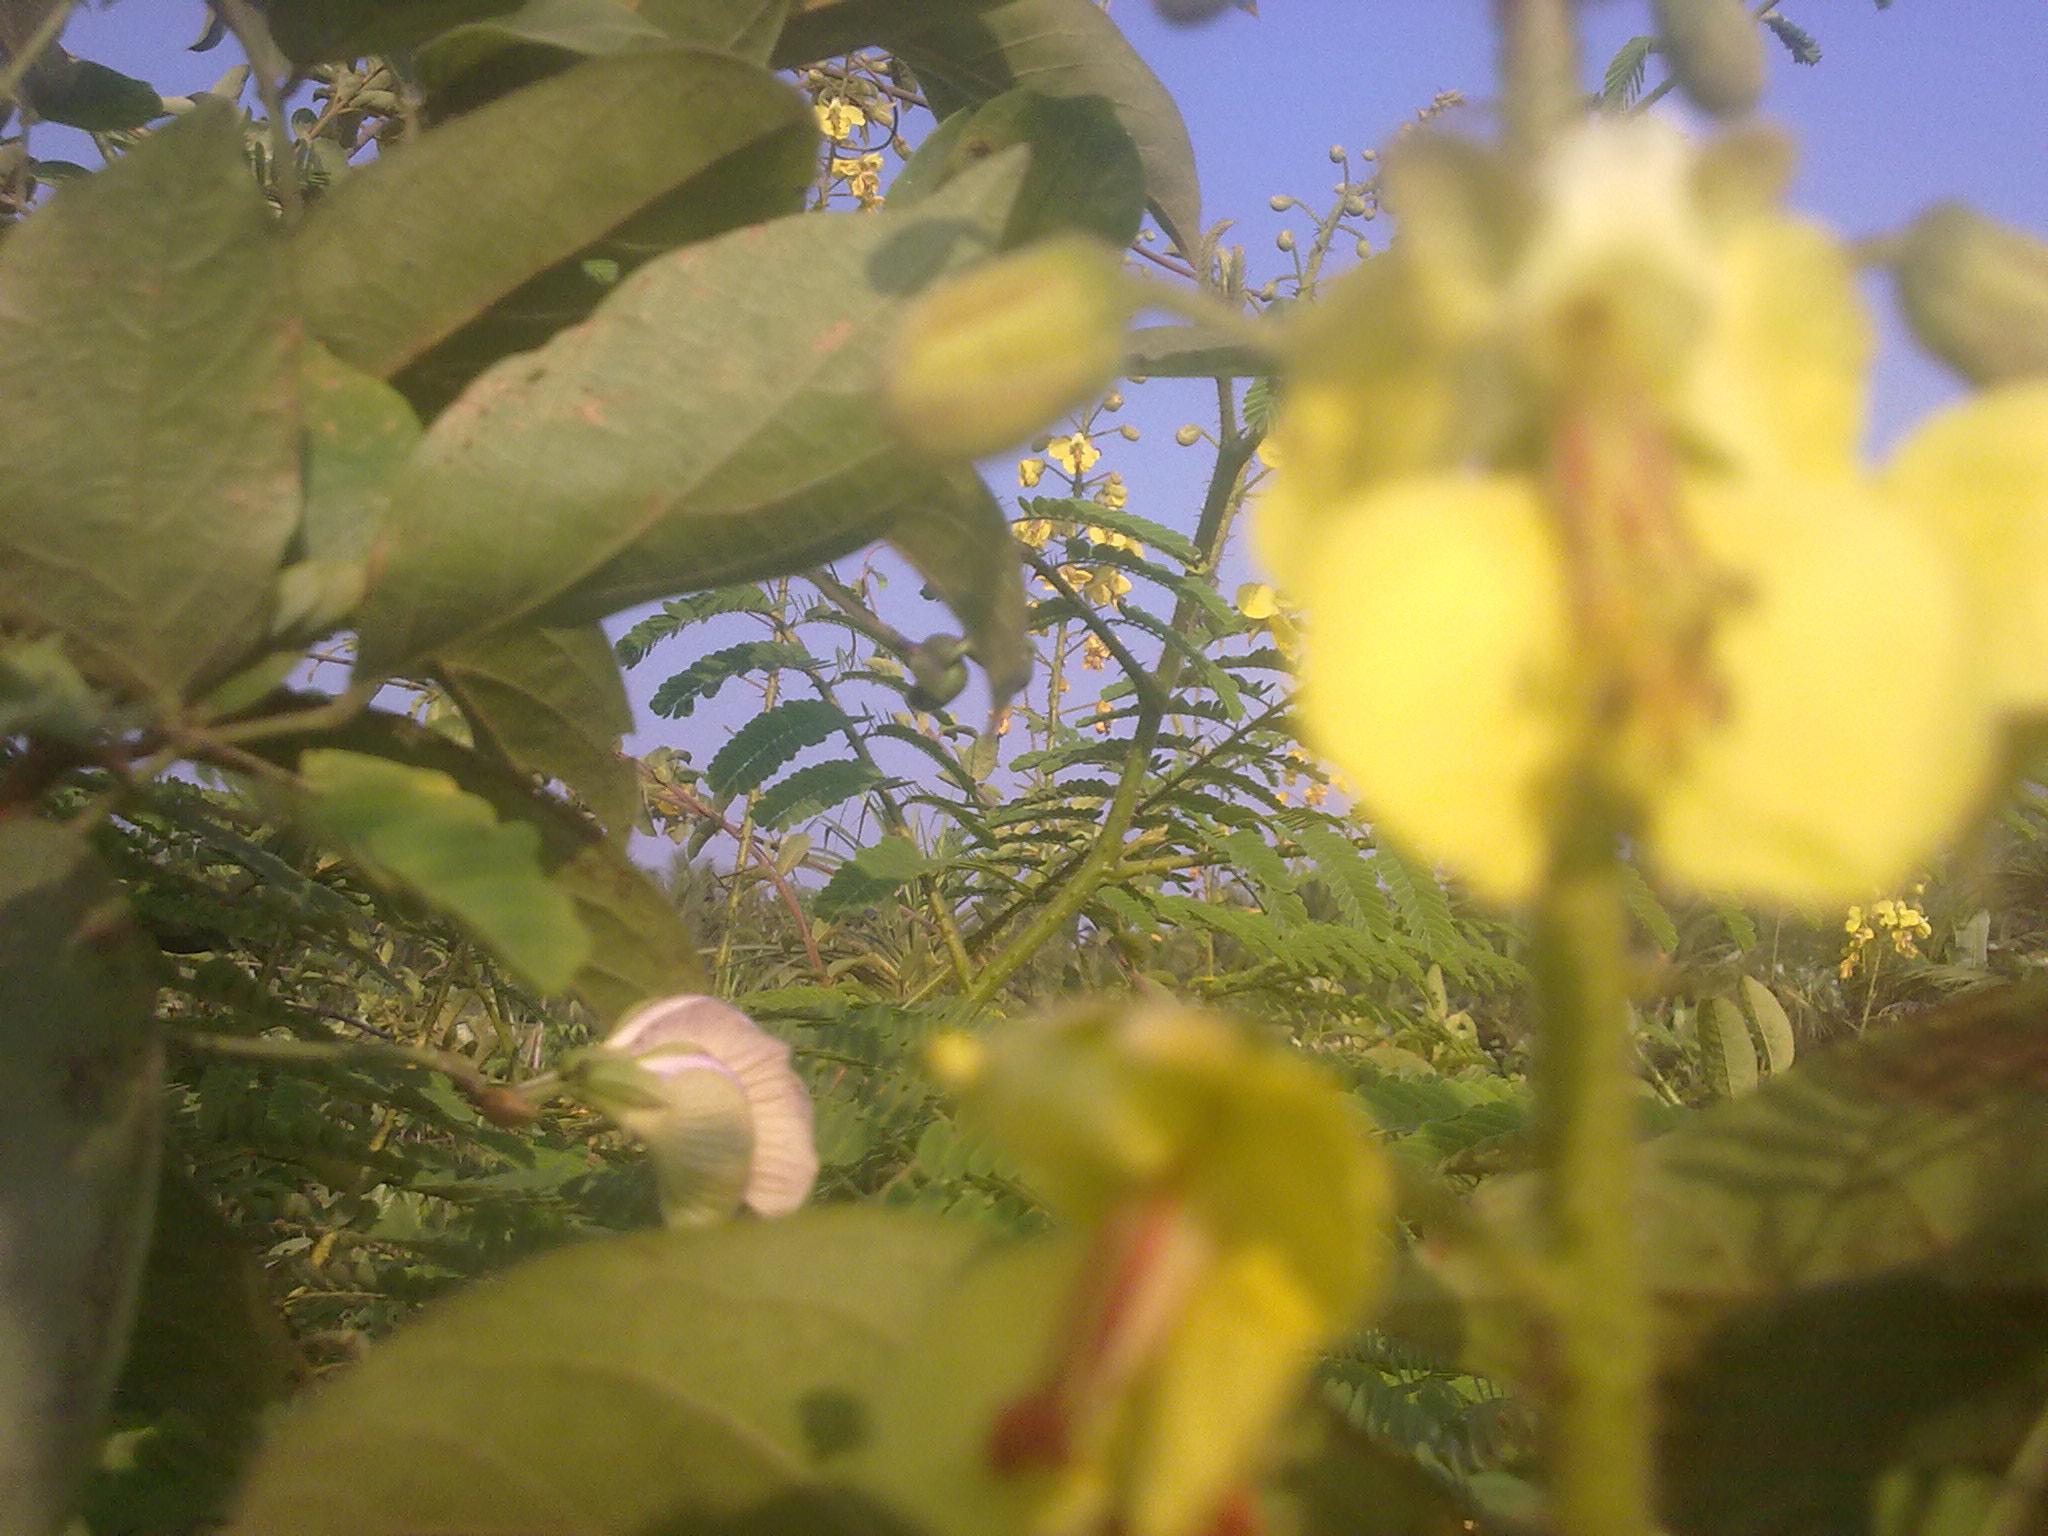 Nokia 5800 Xpres sample photo. Flowers and fruits in my pasture photography